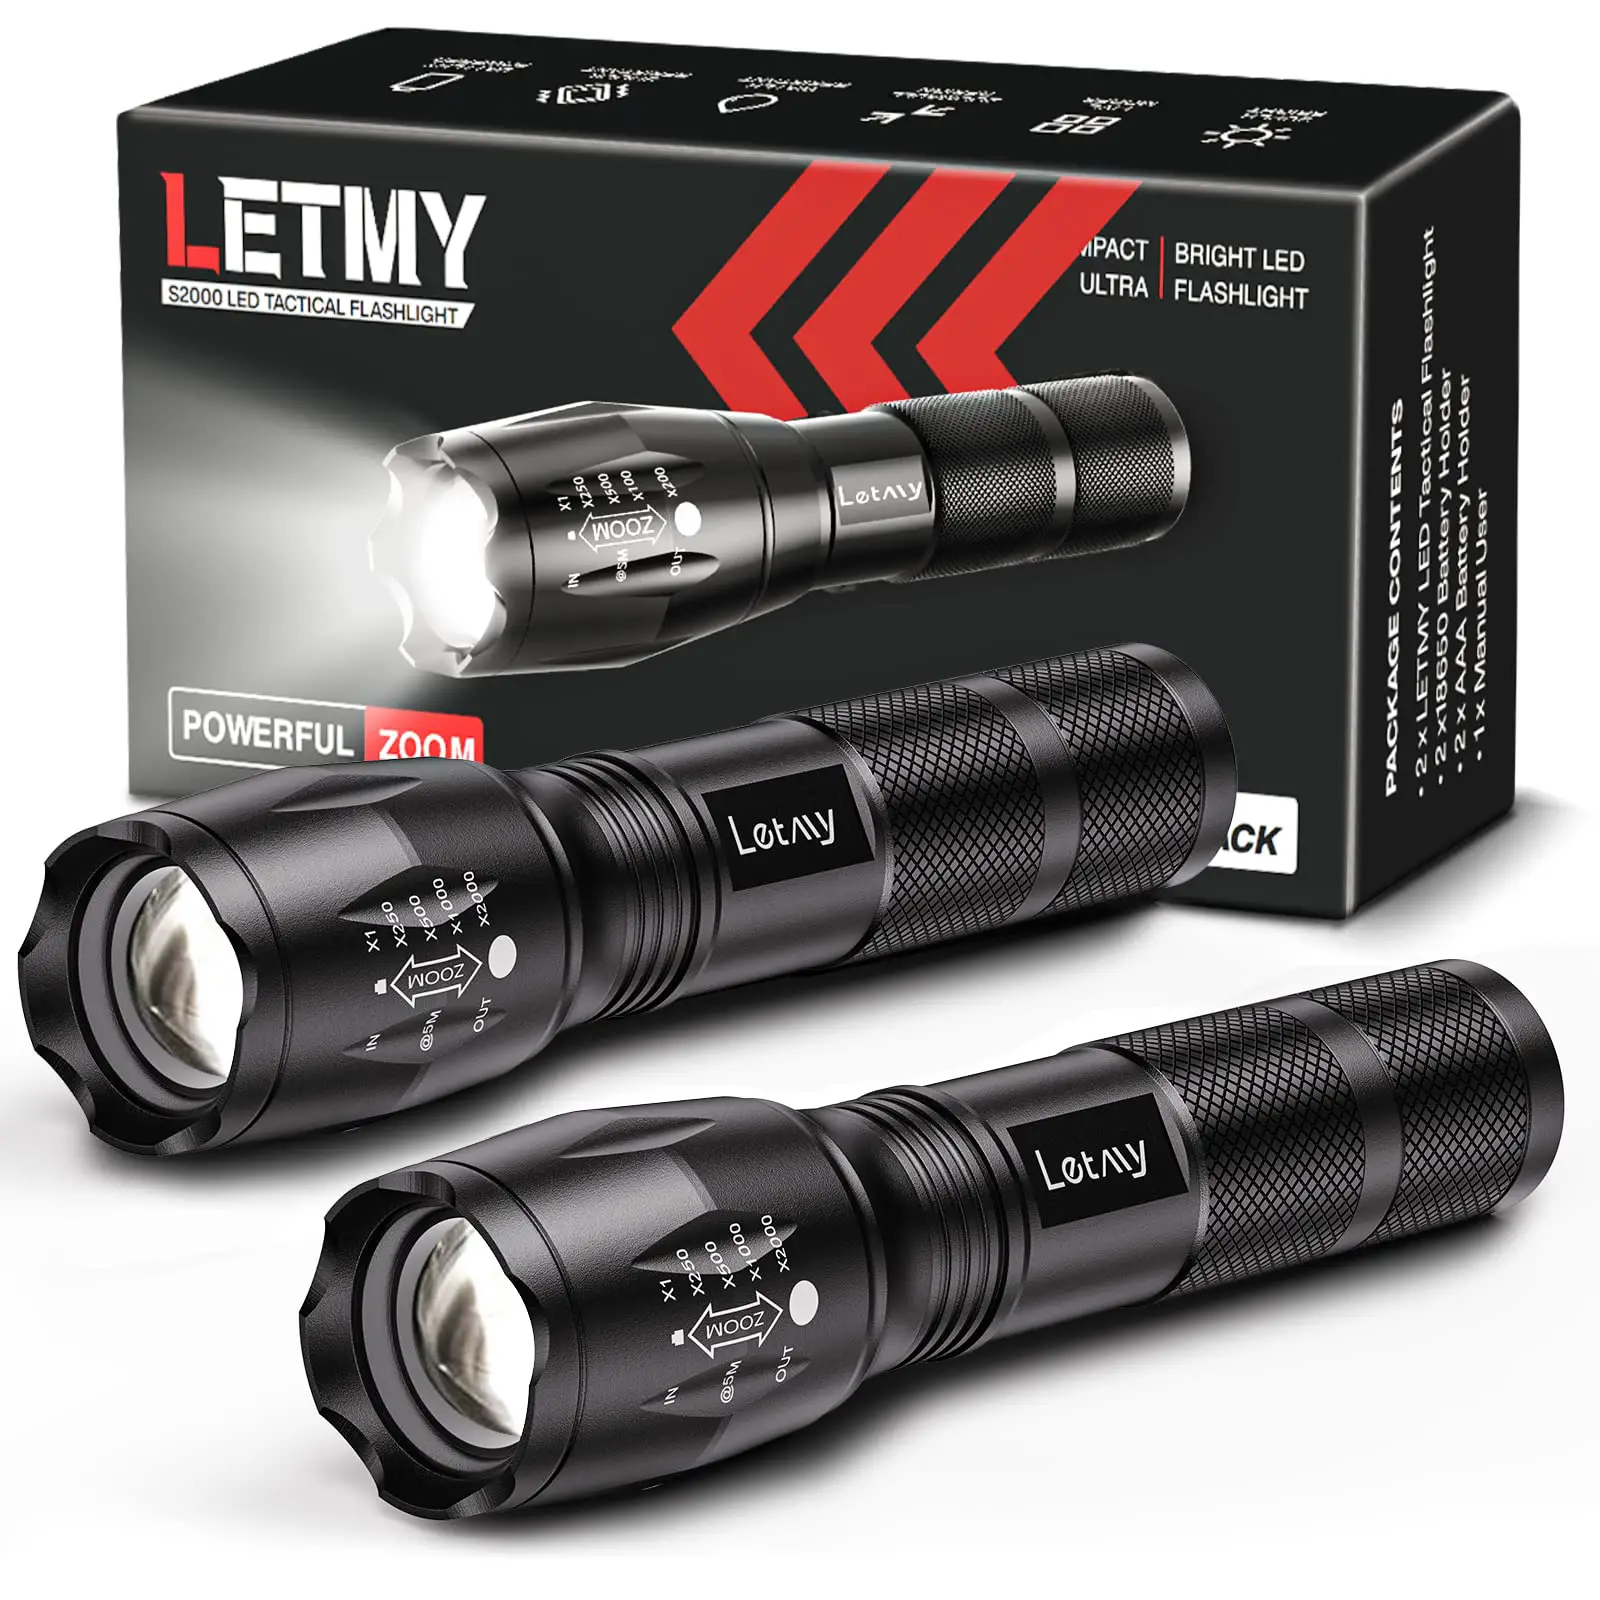 2 black Letmy flashlights in front of black product box